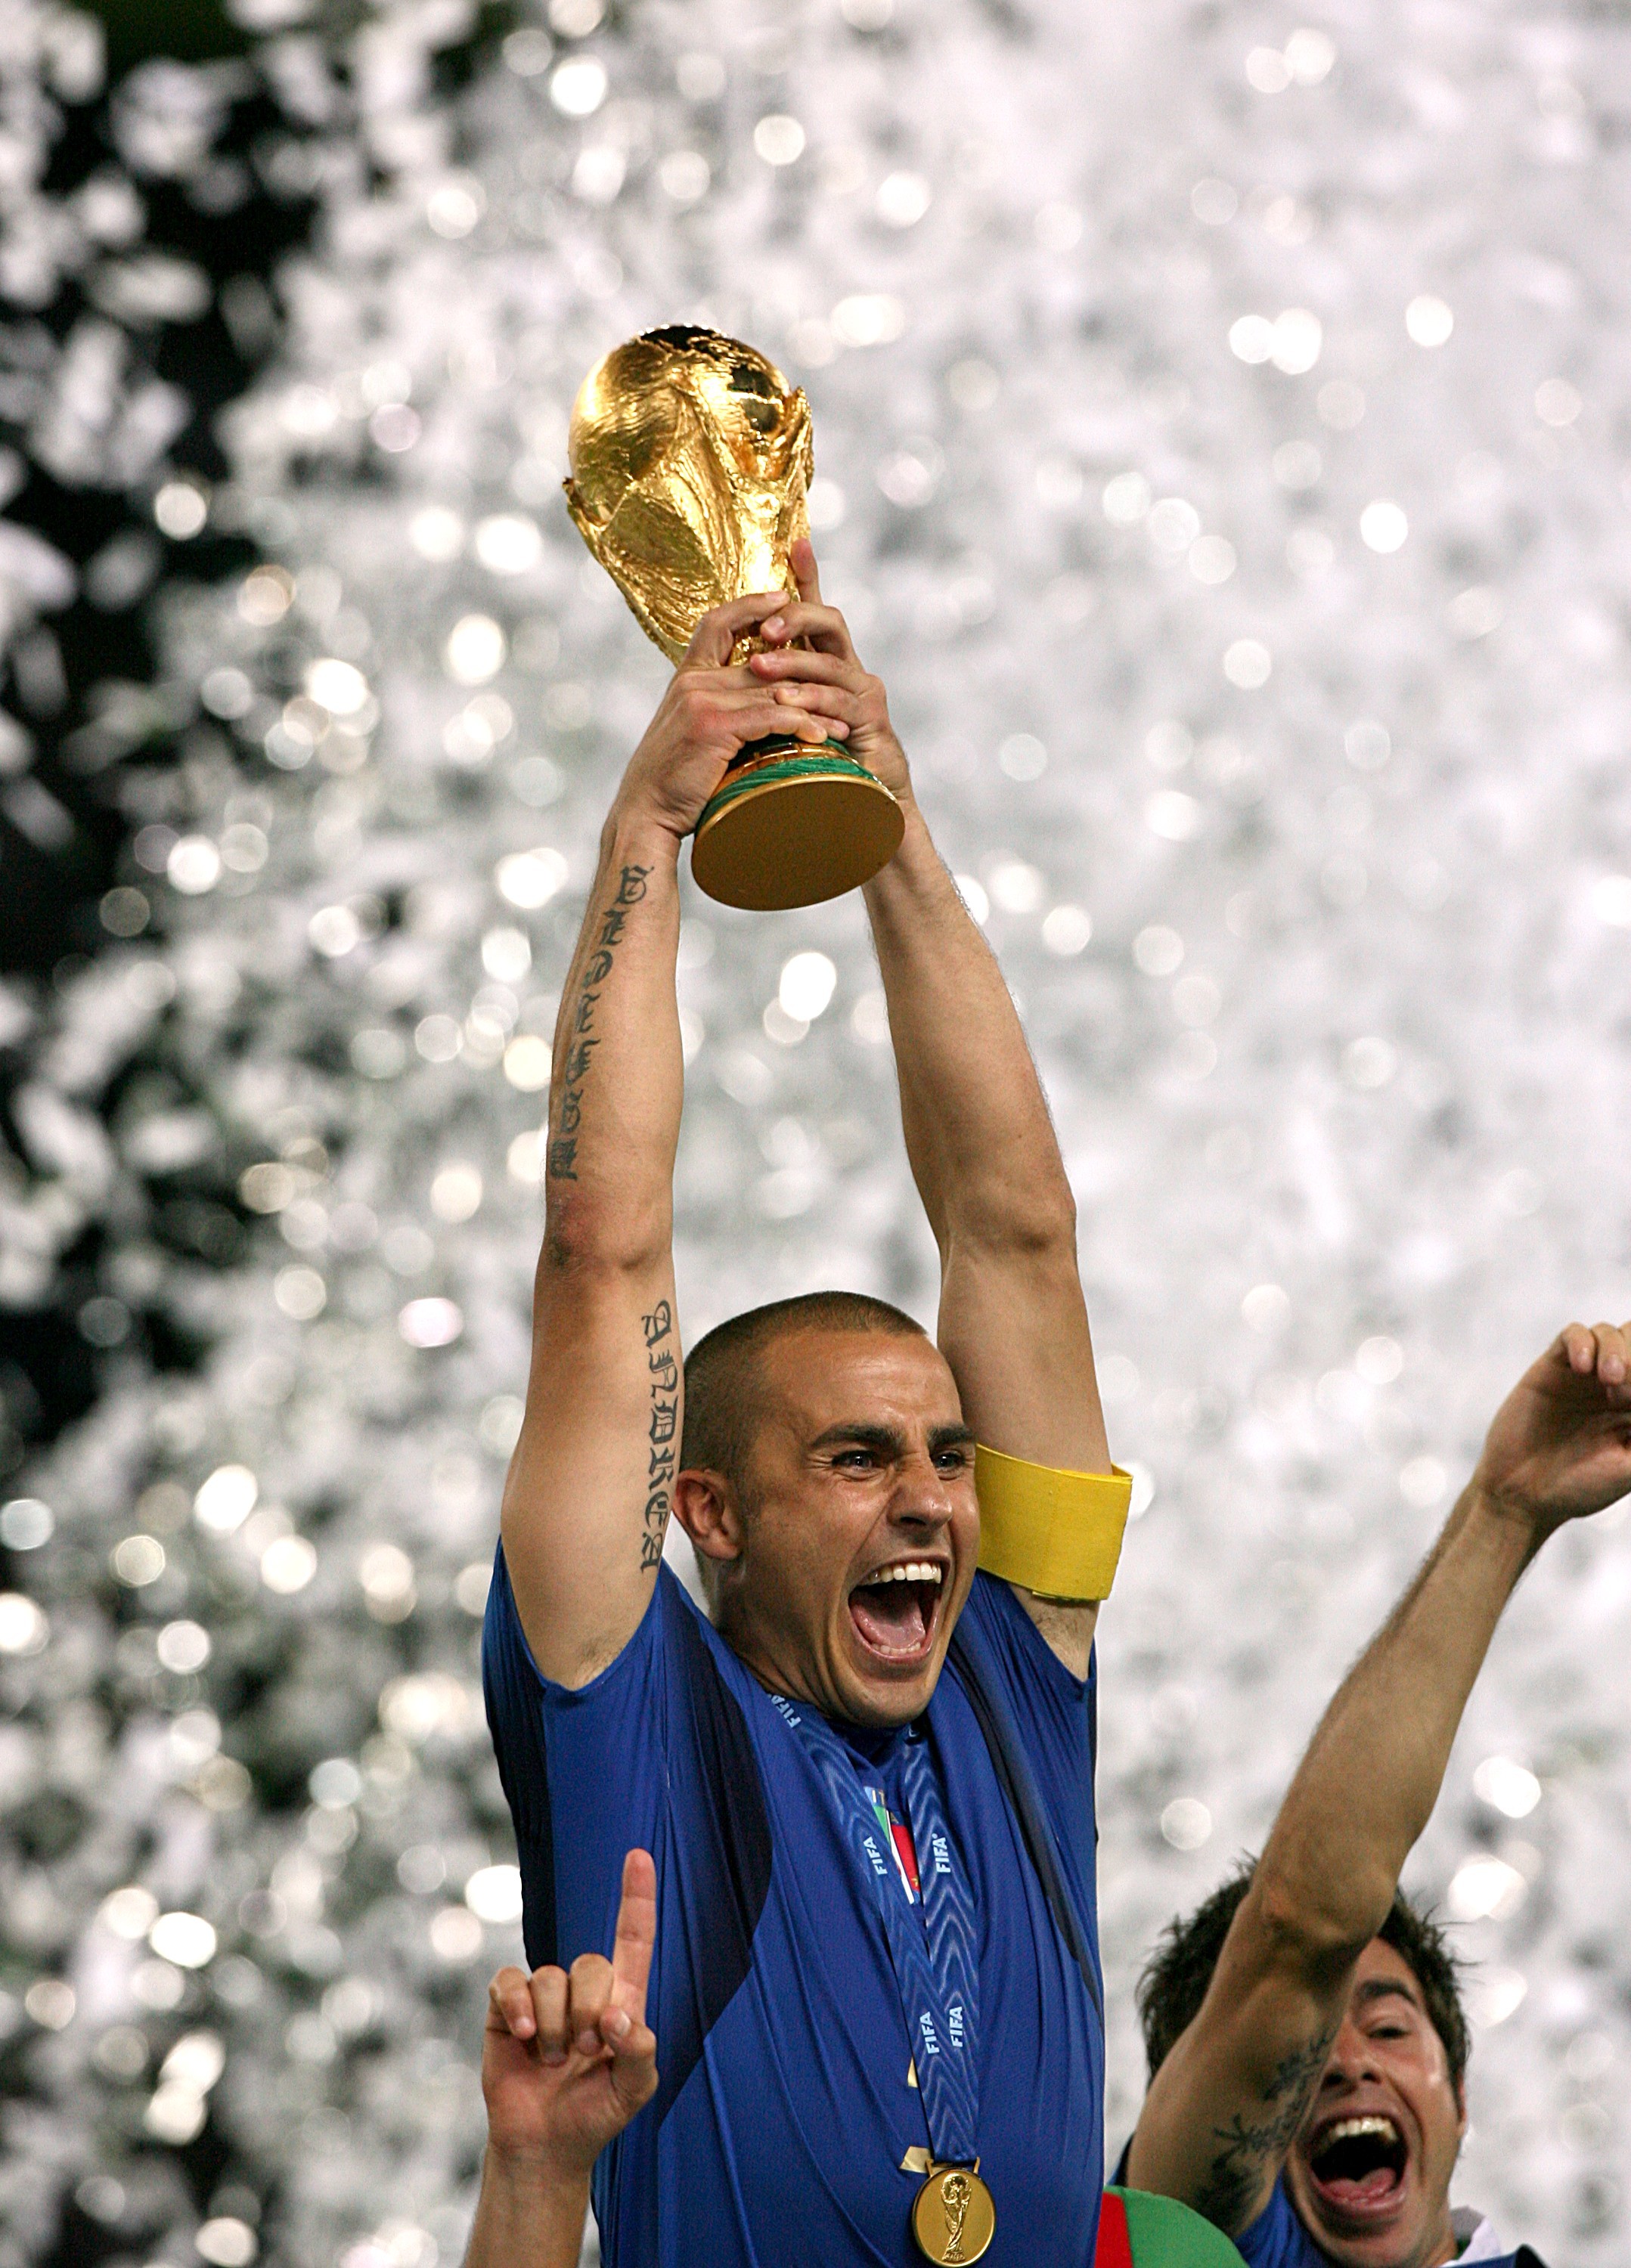 Fabio Cannavaro captained Italy to World Cup glory in 2006